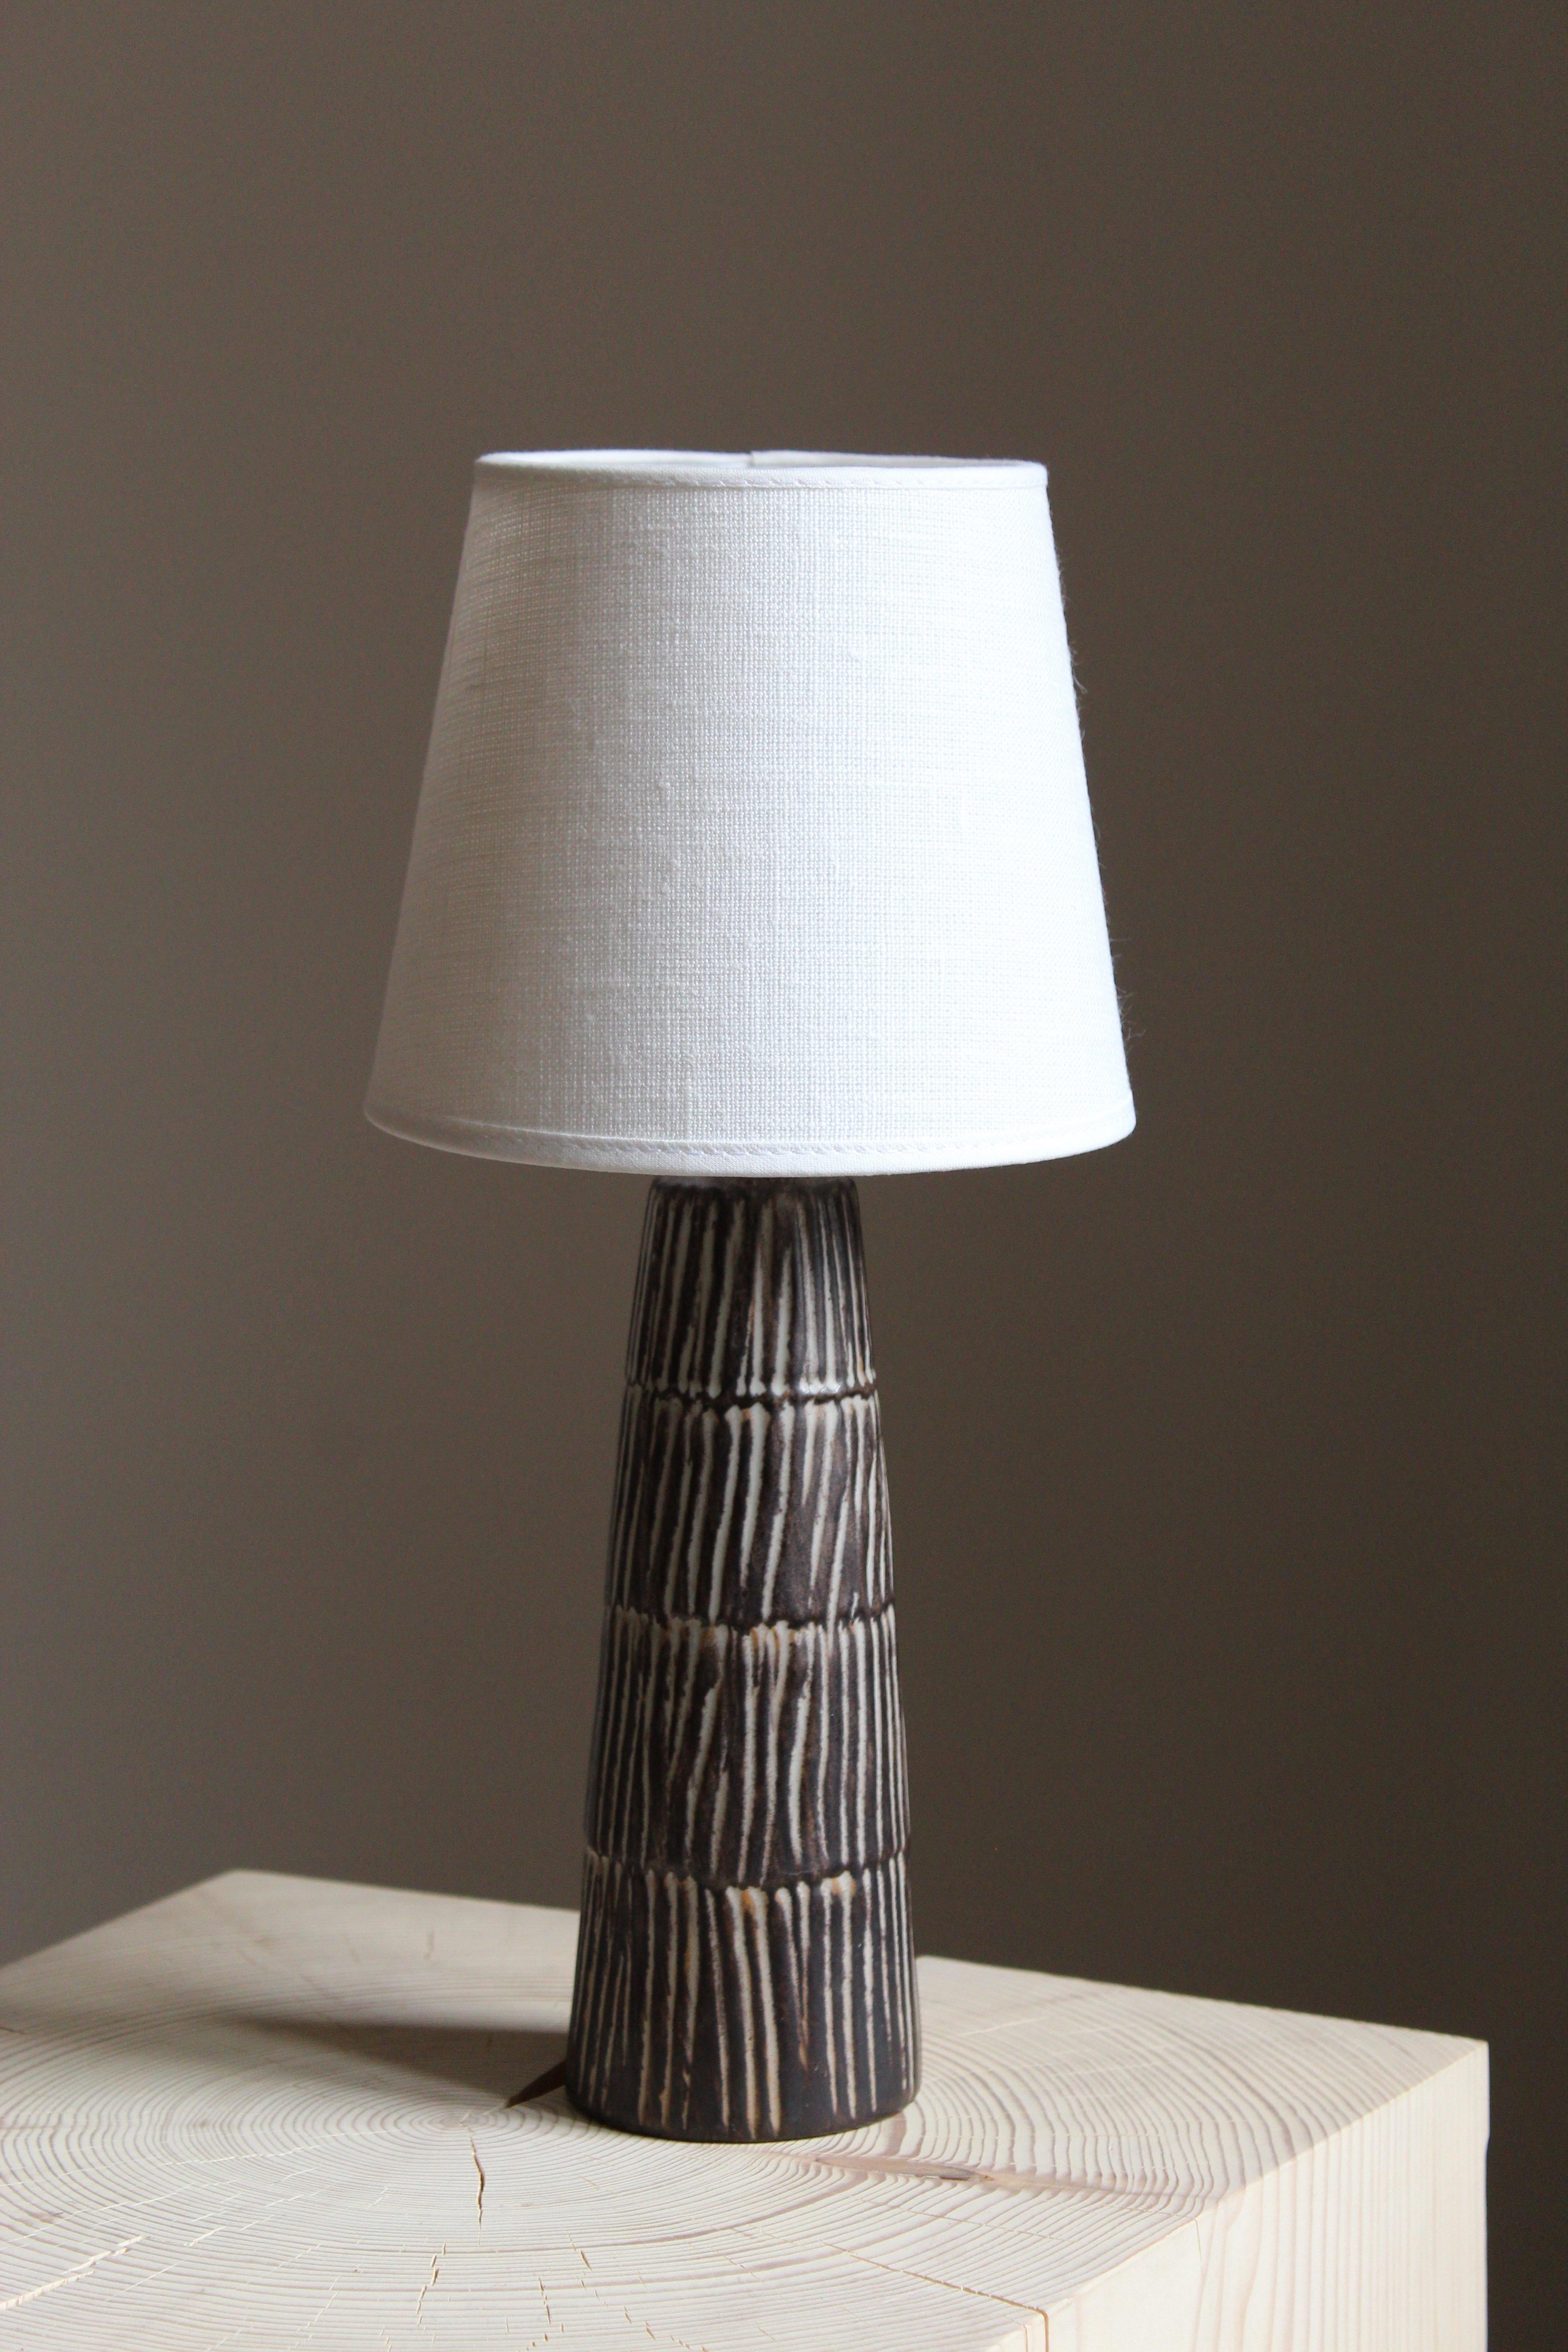 A stoneware lamp, produced by Jette Hellerøe, Denmark 1950, signed. Sold without lampshade.

Glaze features brown-grey colors.

Other ceramicists of the period include Axel Salto, Wilhelm Kåge, Arne Bang, Claude Connover, and Carl-Harry Stålhane.